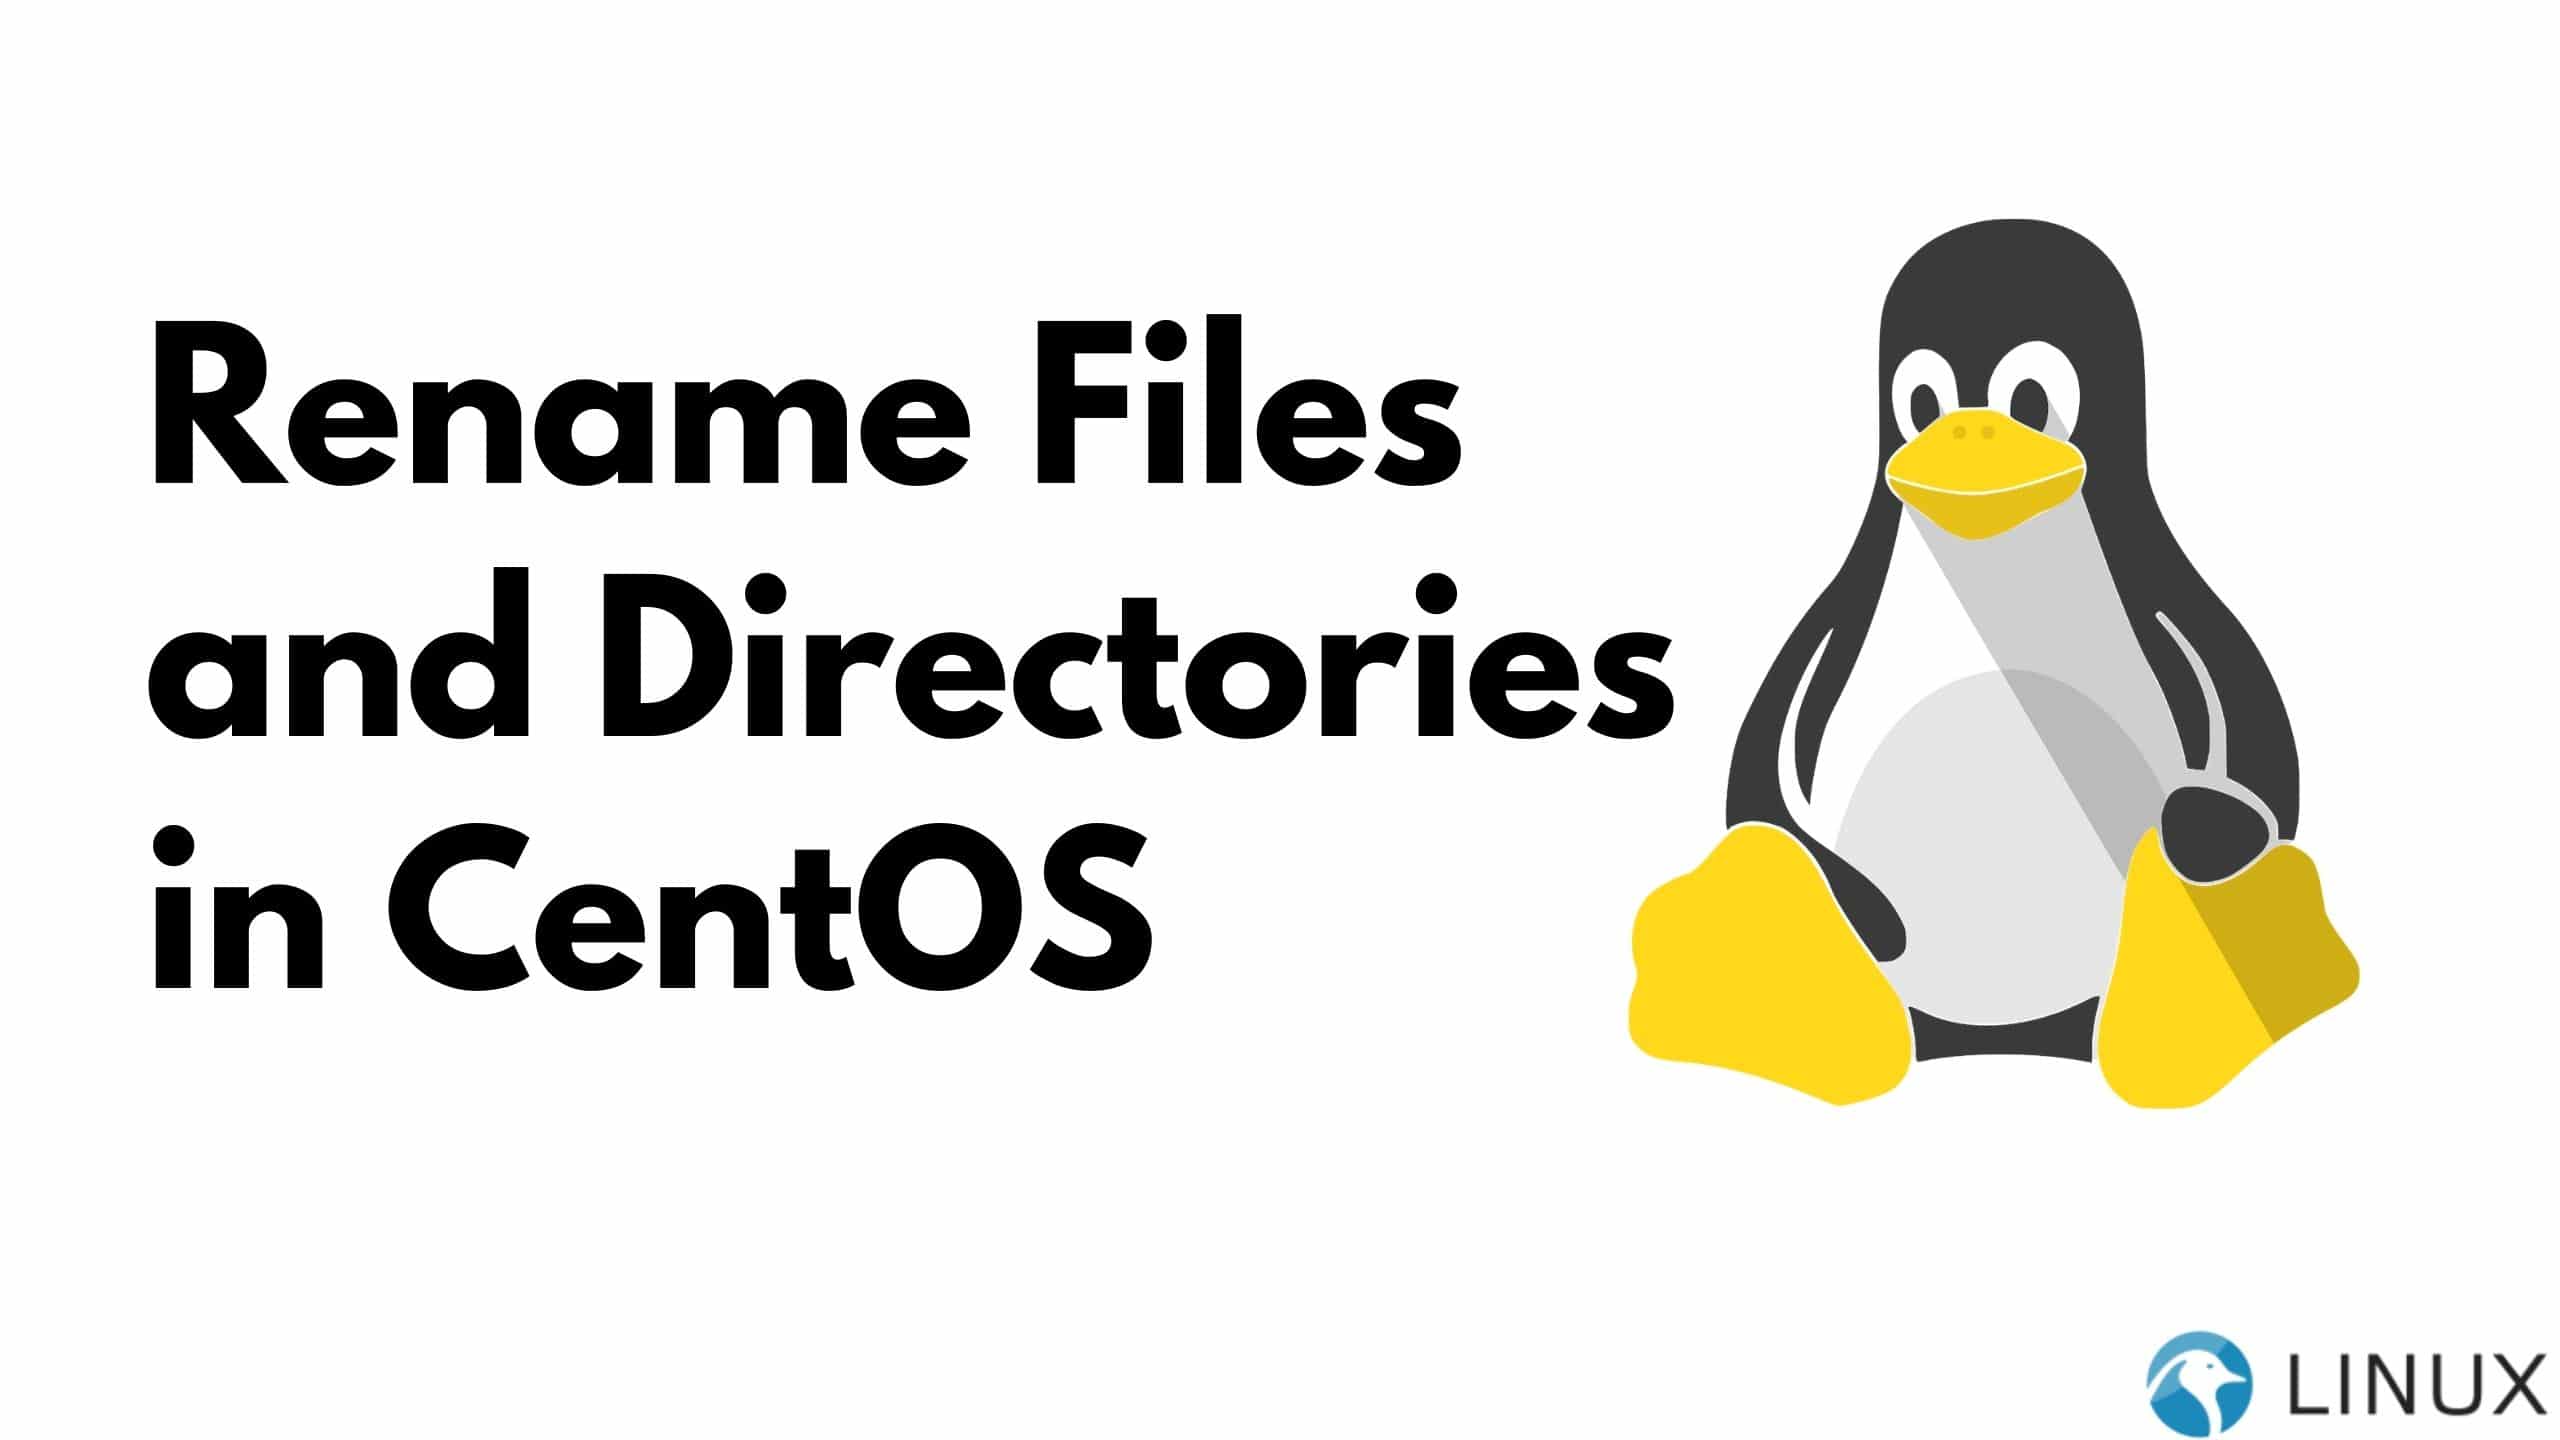 Rename Files and Directories in CentOS